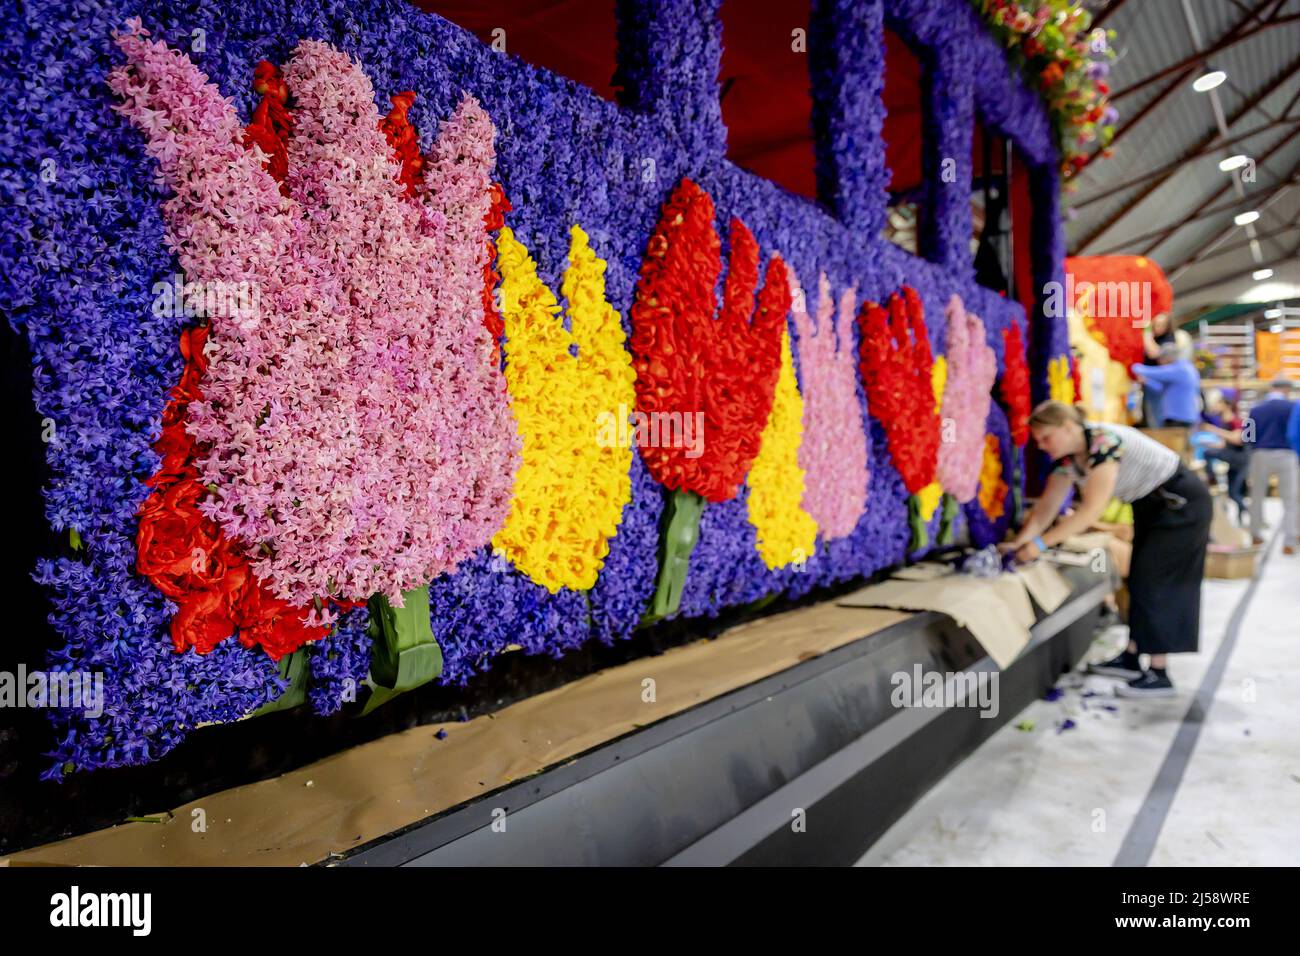 2022-04-21 14:40:06 SASSENHEIM - Flower cutters at work on floats, floats decorated with flowers, which are being built for the annual Flower Parade of the Bollenstreek. The colorful parade will travel from Noordwijk to Haarlem for the 75th time this year. ANP ROBIN VAN LONKHUIJSEN netherlands out - belgium out Stock Photo